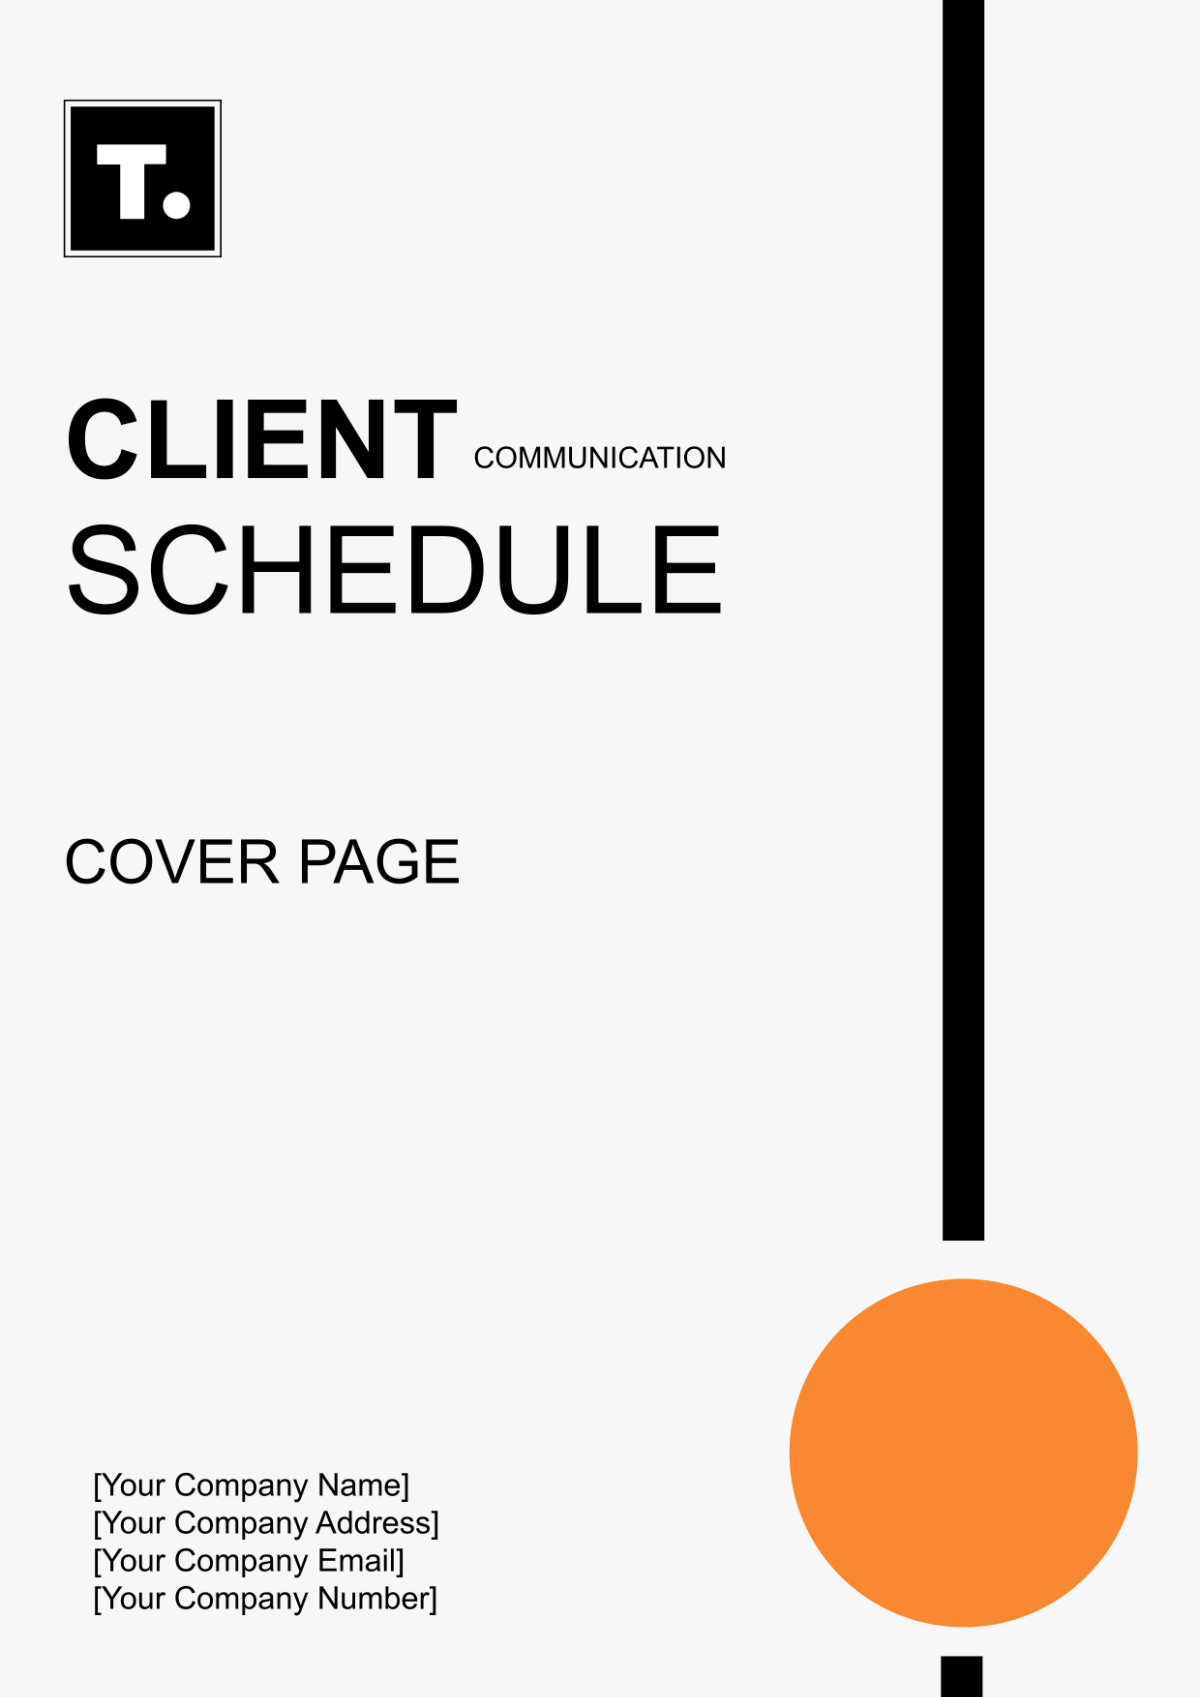 Client Communication Schedule Cover Page